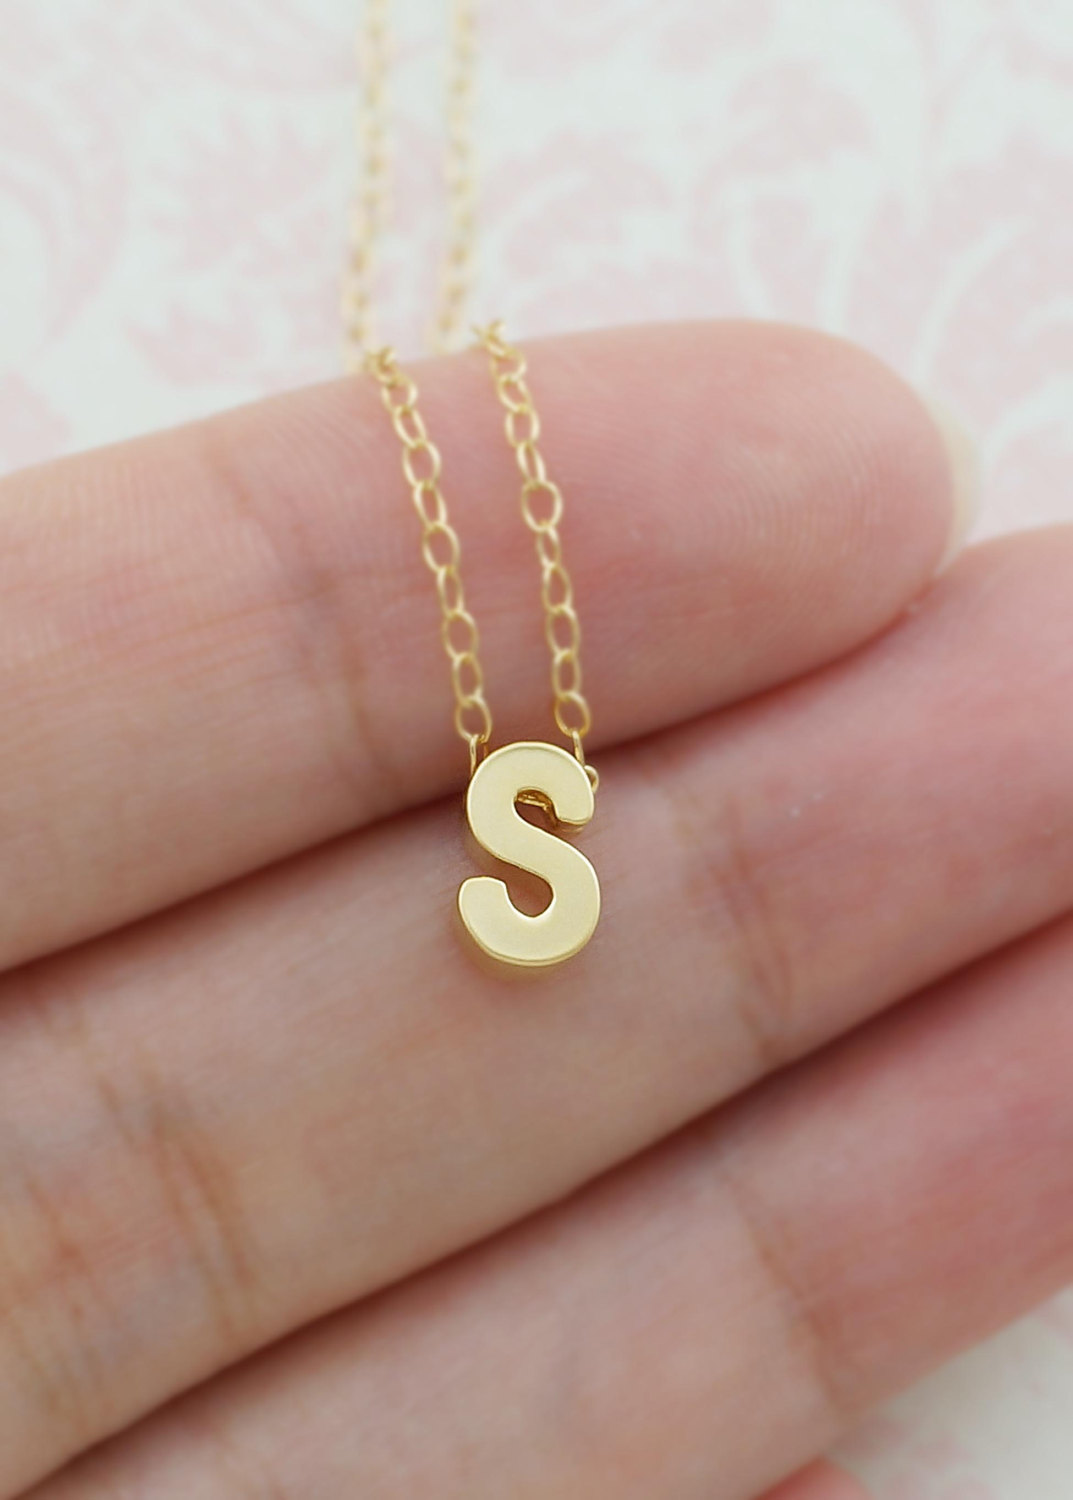 Gold Initial Necklace Gold Filled Chain Personalized Necklace Bridesmaid Necklace Bridesmaids Gift Weddings Christmas Gift